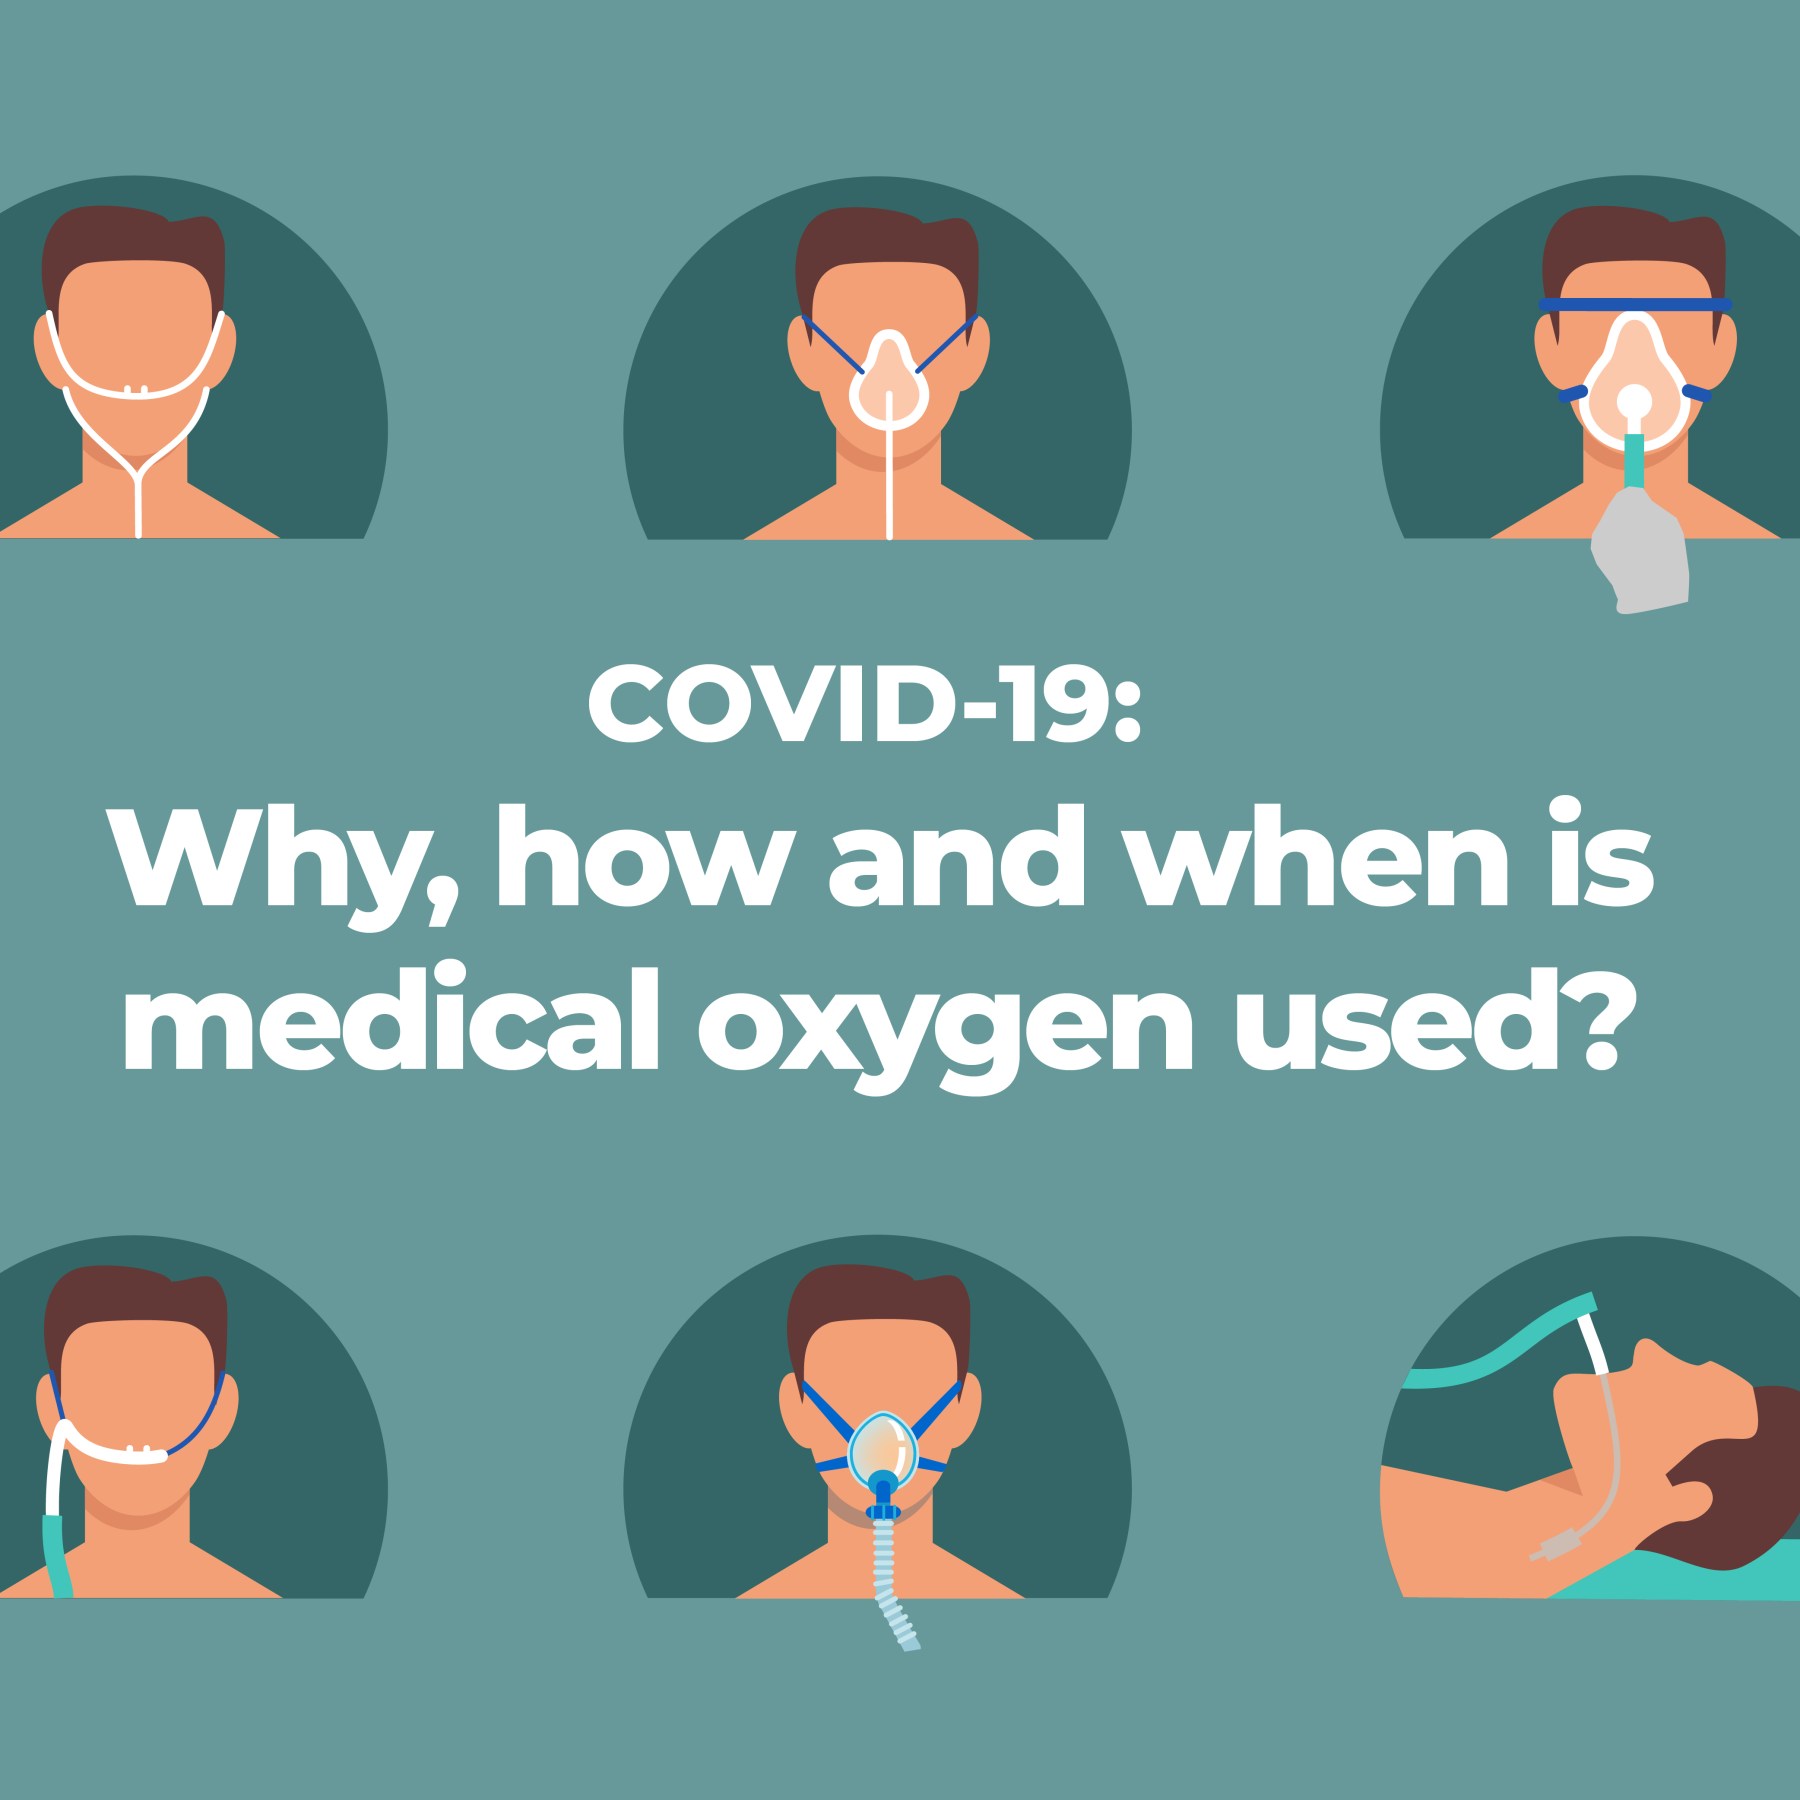 How is medical oxygen, vital for COVID-19 patients, produced